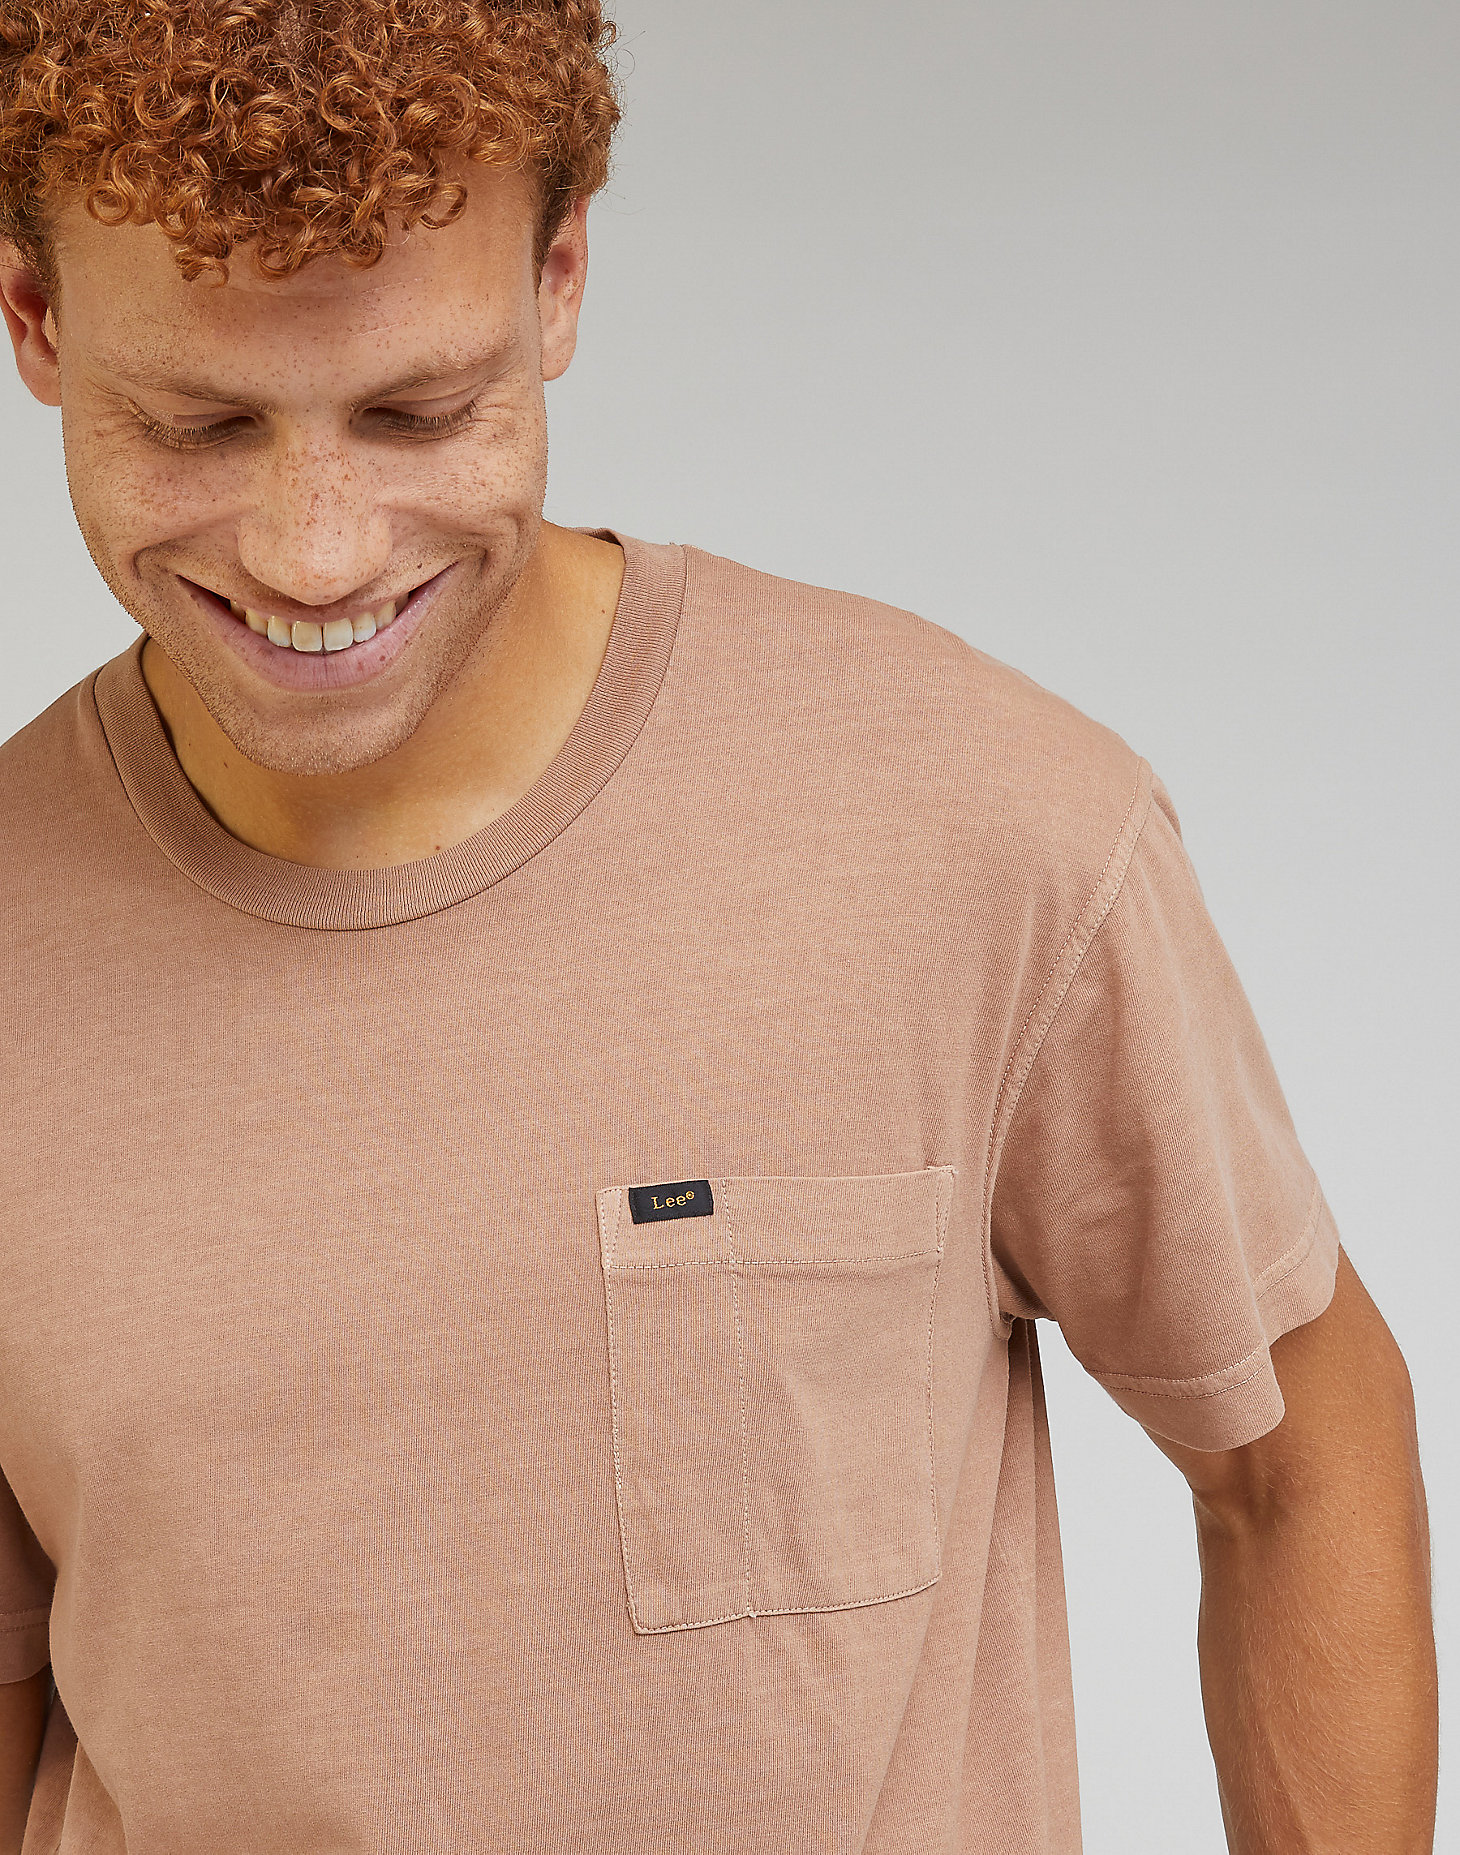 Relaxed Pocket Tee in Cider alternative view 4